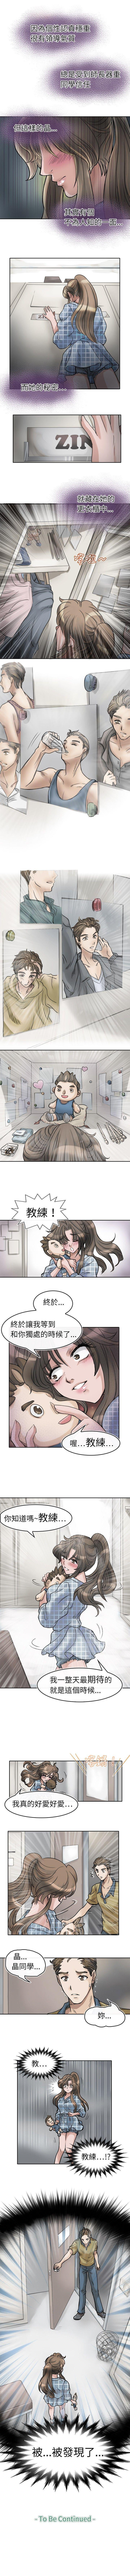 Group Sex 教練教教我 1-50 Shemales - Page 7